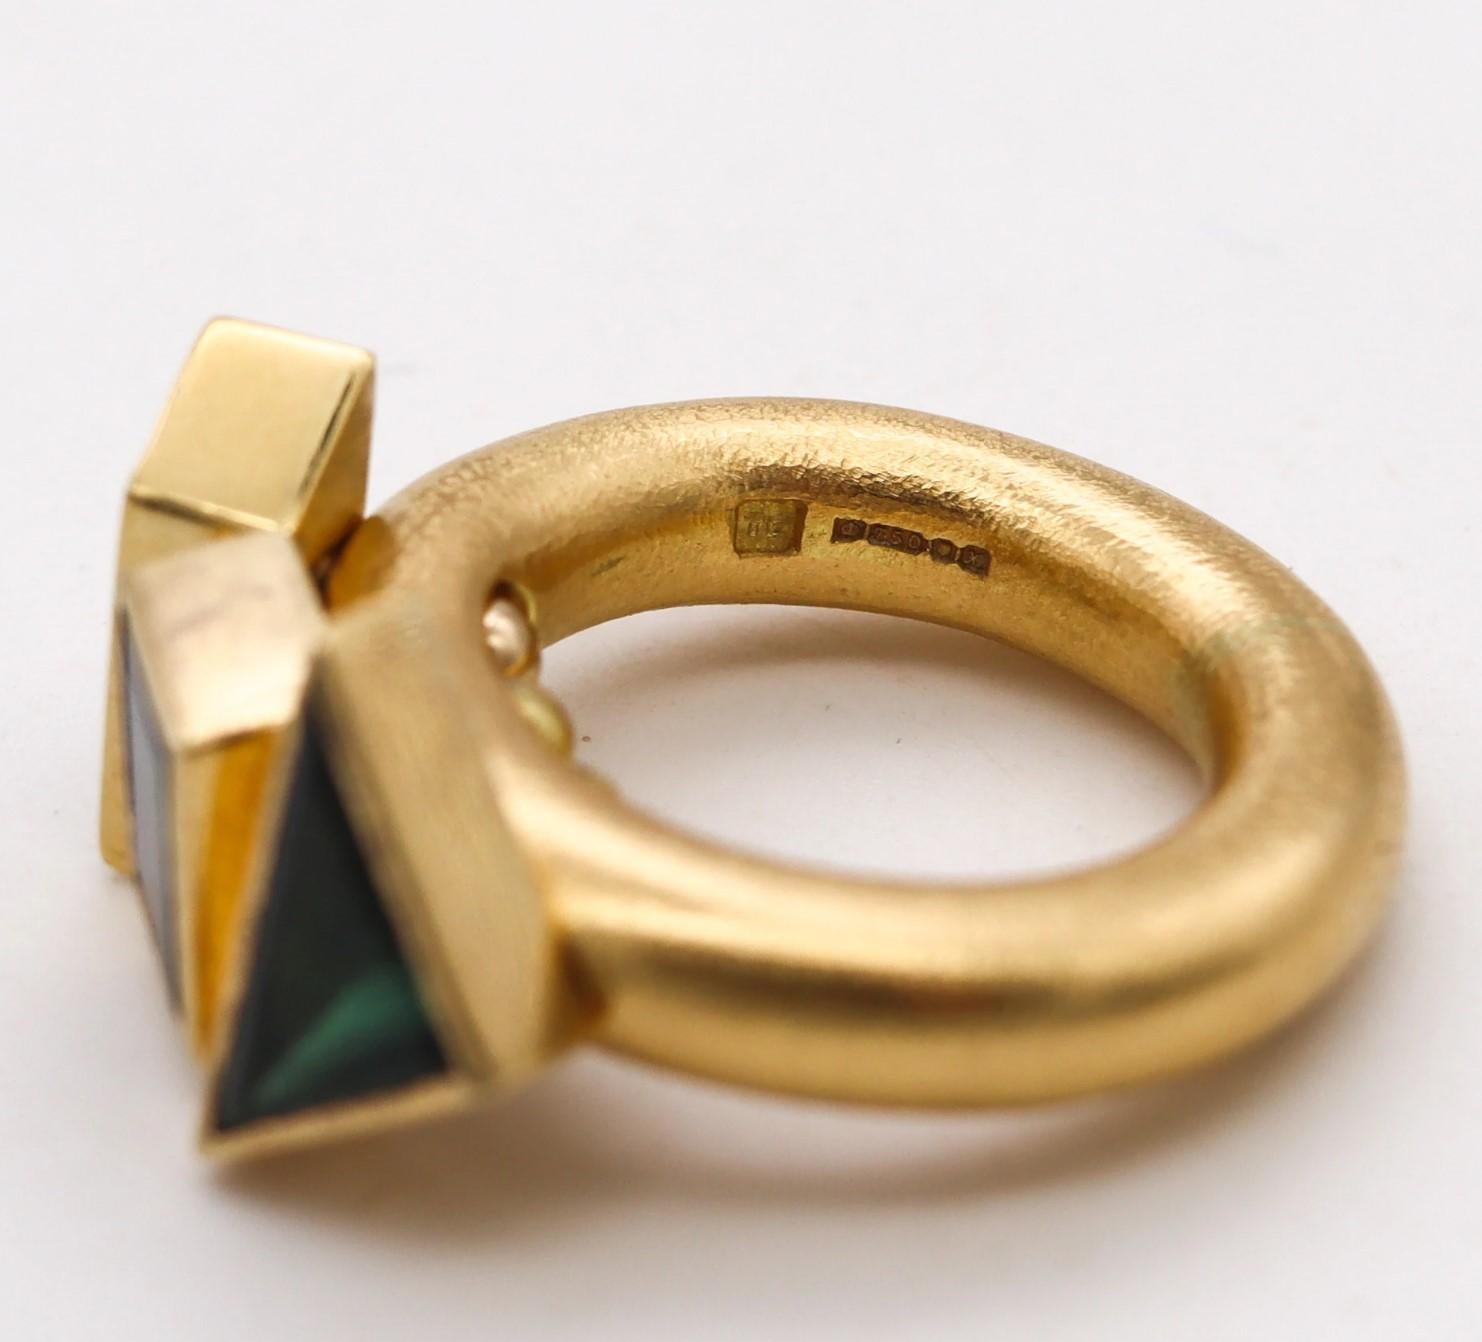 Mixed Cut Tina Engell 1997 London Kinetic Sculptural Ring In 18Kt Gold 3.75 Cts Tourmaline